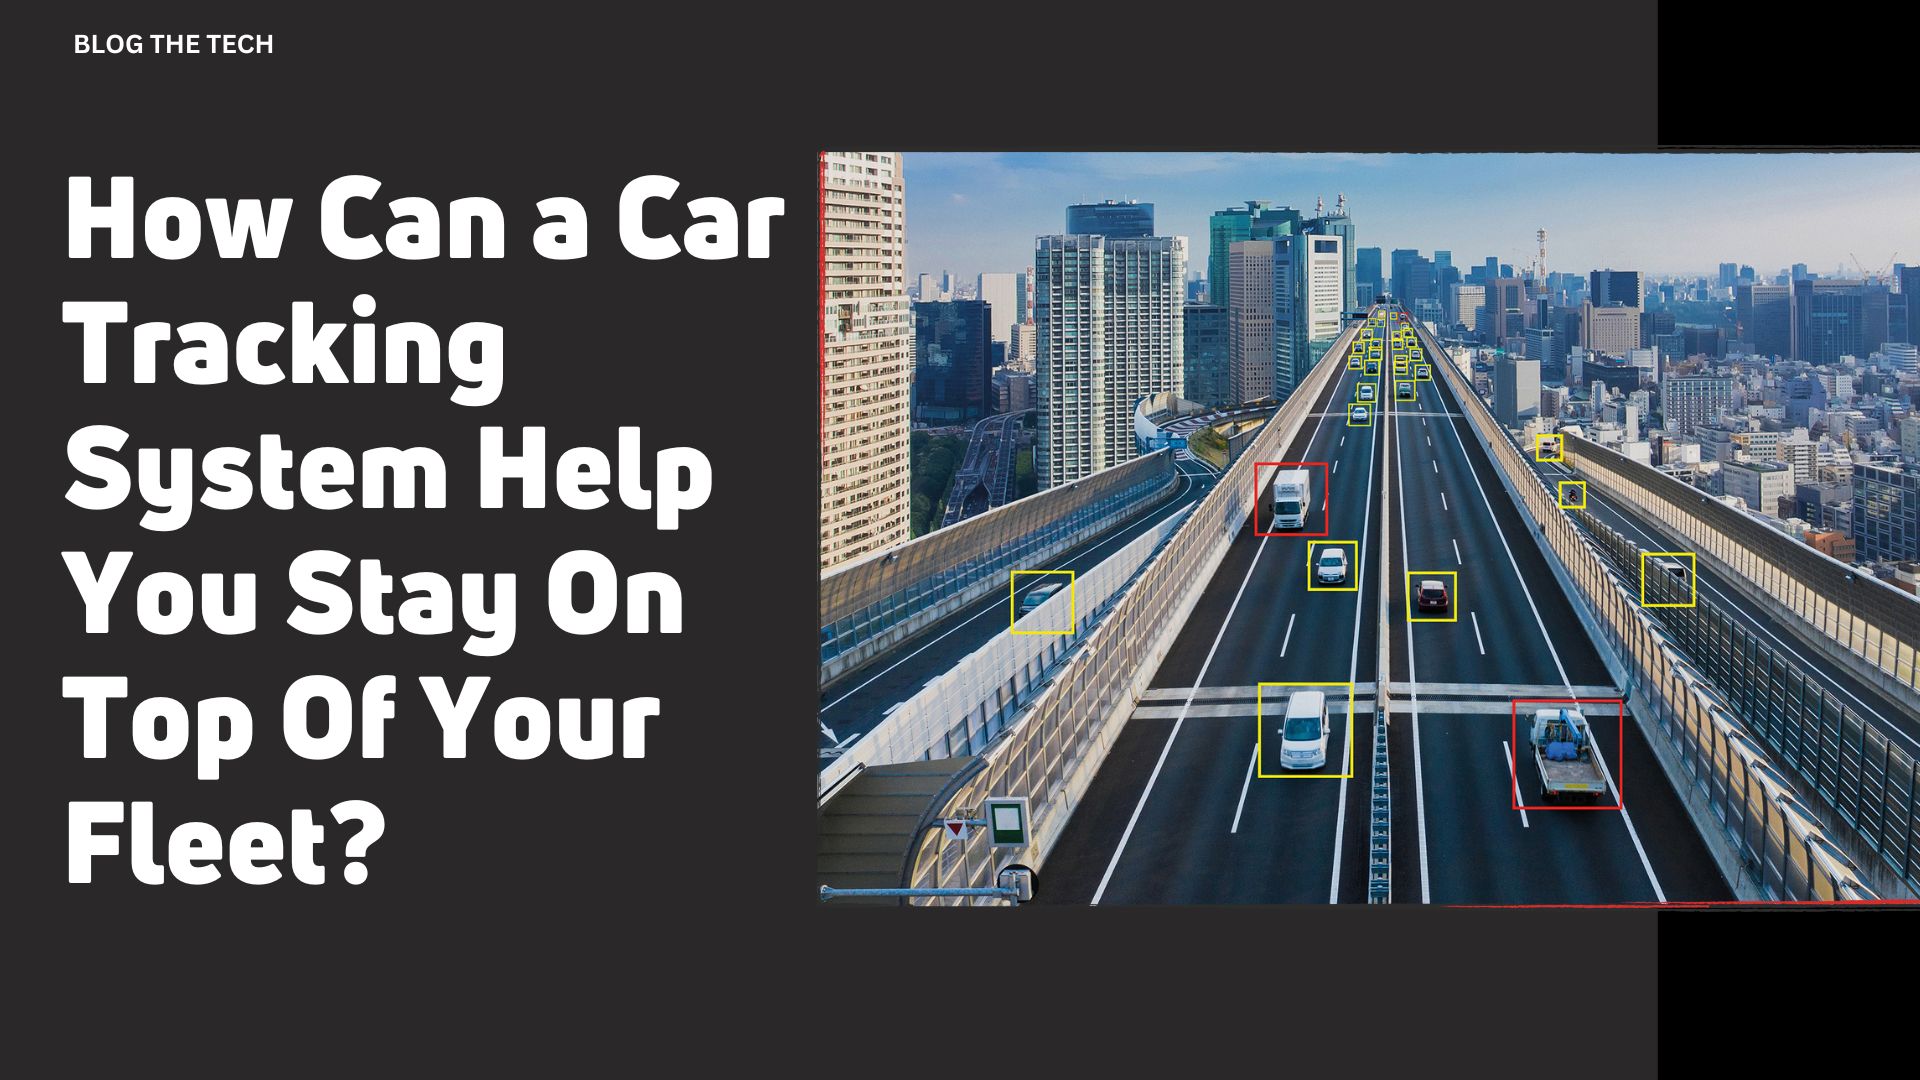 How Can a Car Tracking System Help You Stay On Top Of Your Fleet?